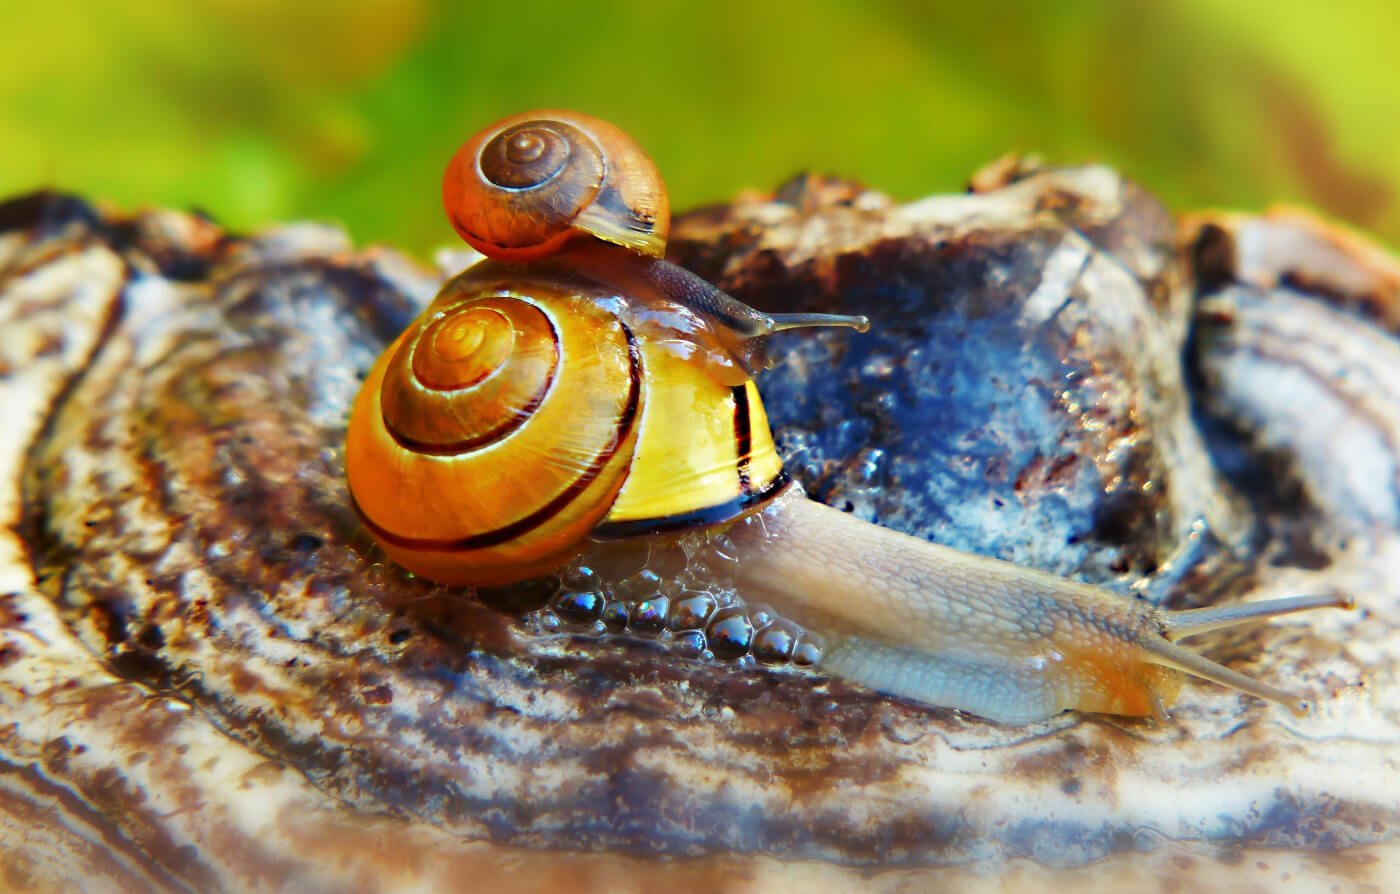 snail mom carrying baby on her back